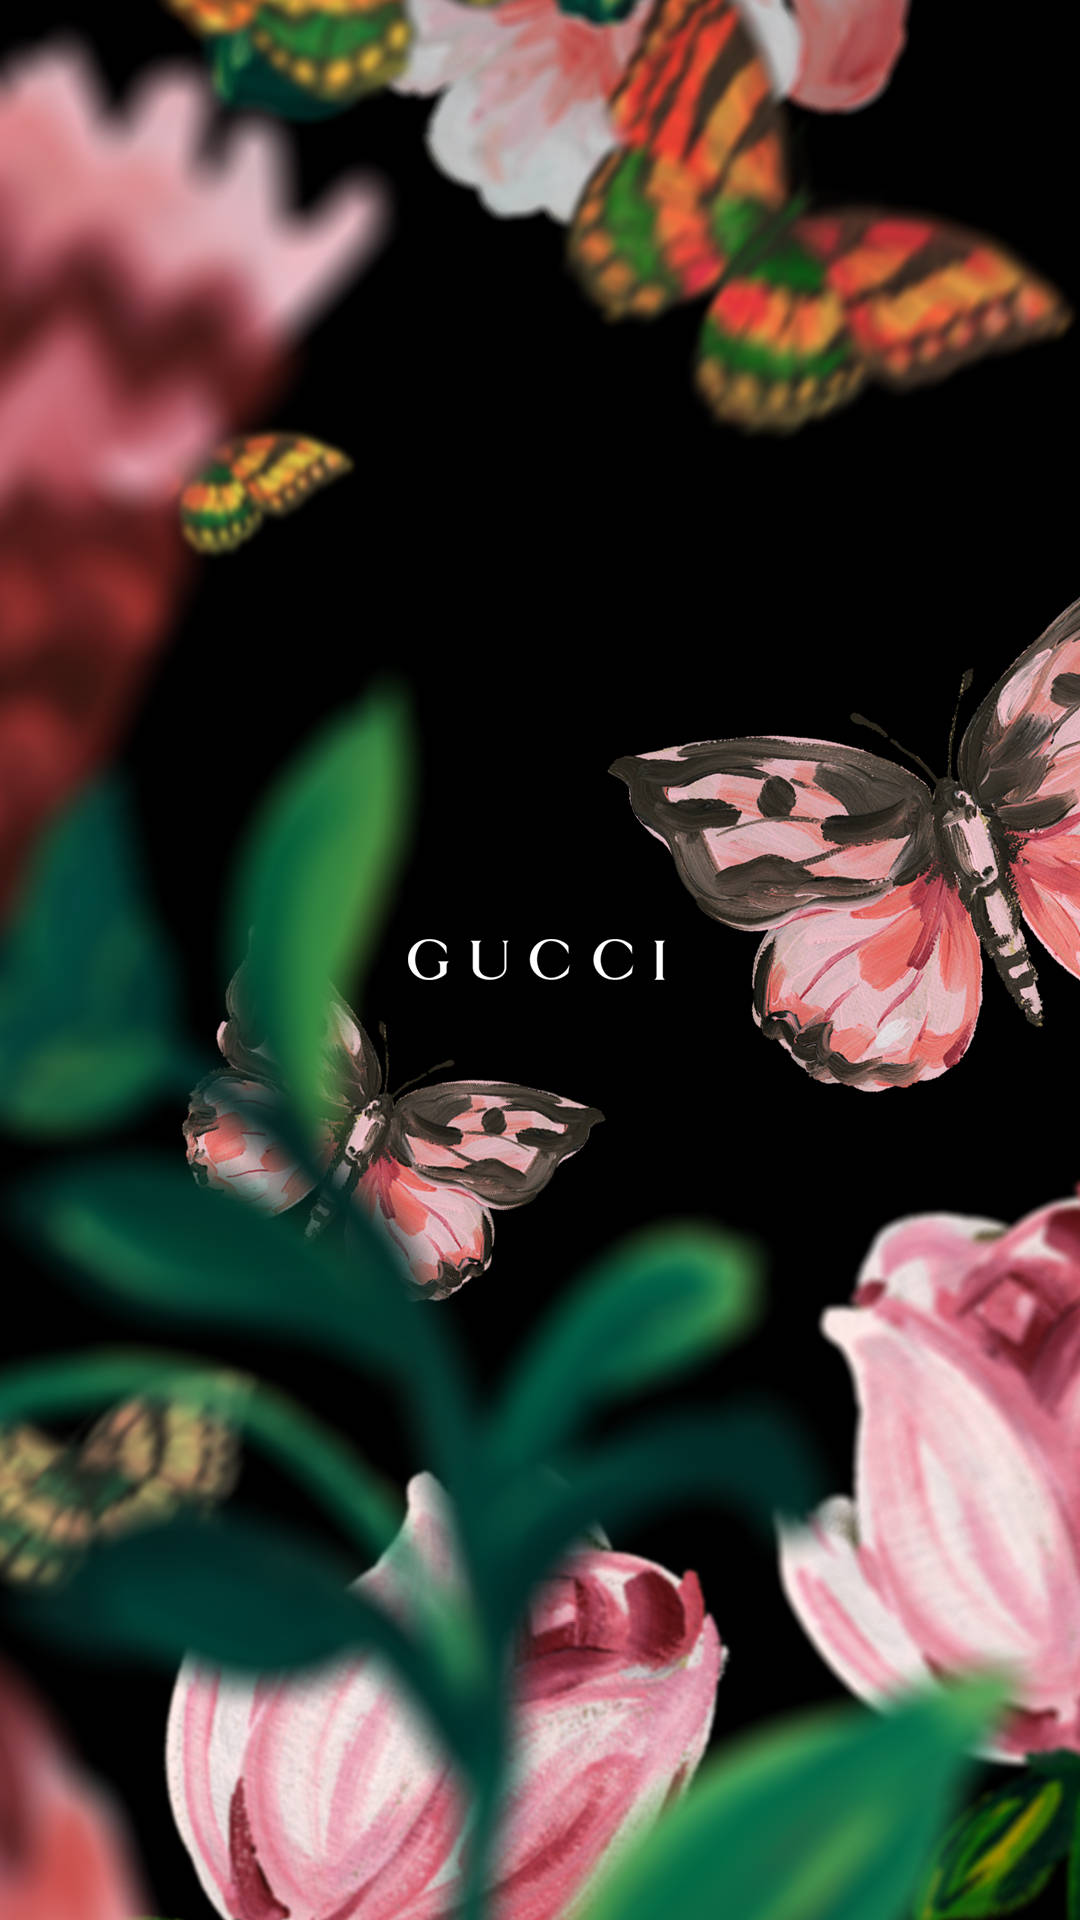 Butterfly Gucci Iphone Wallpaper